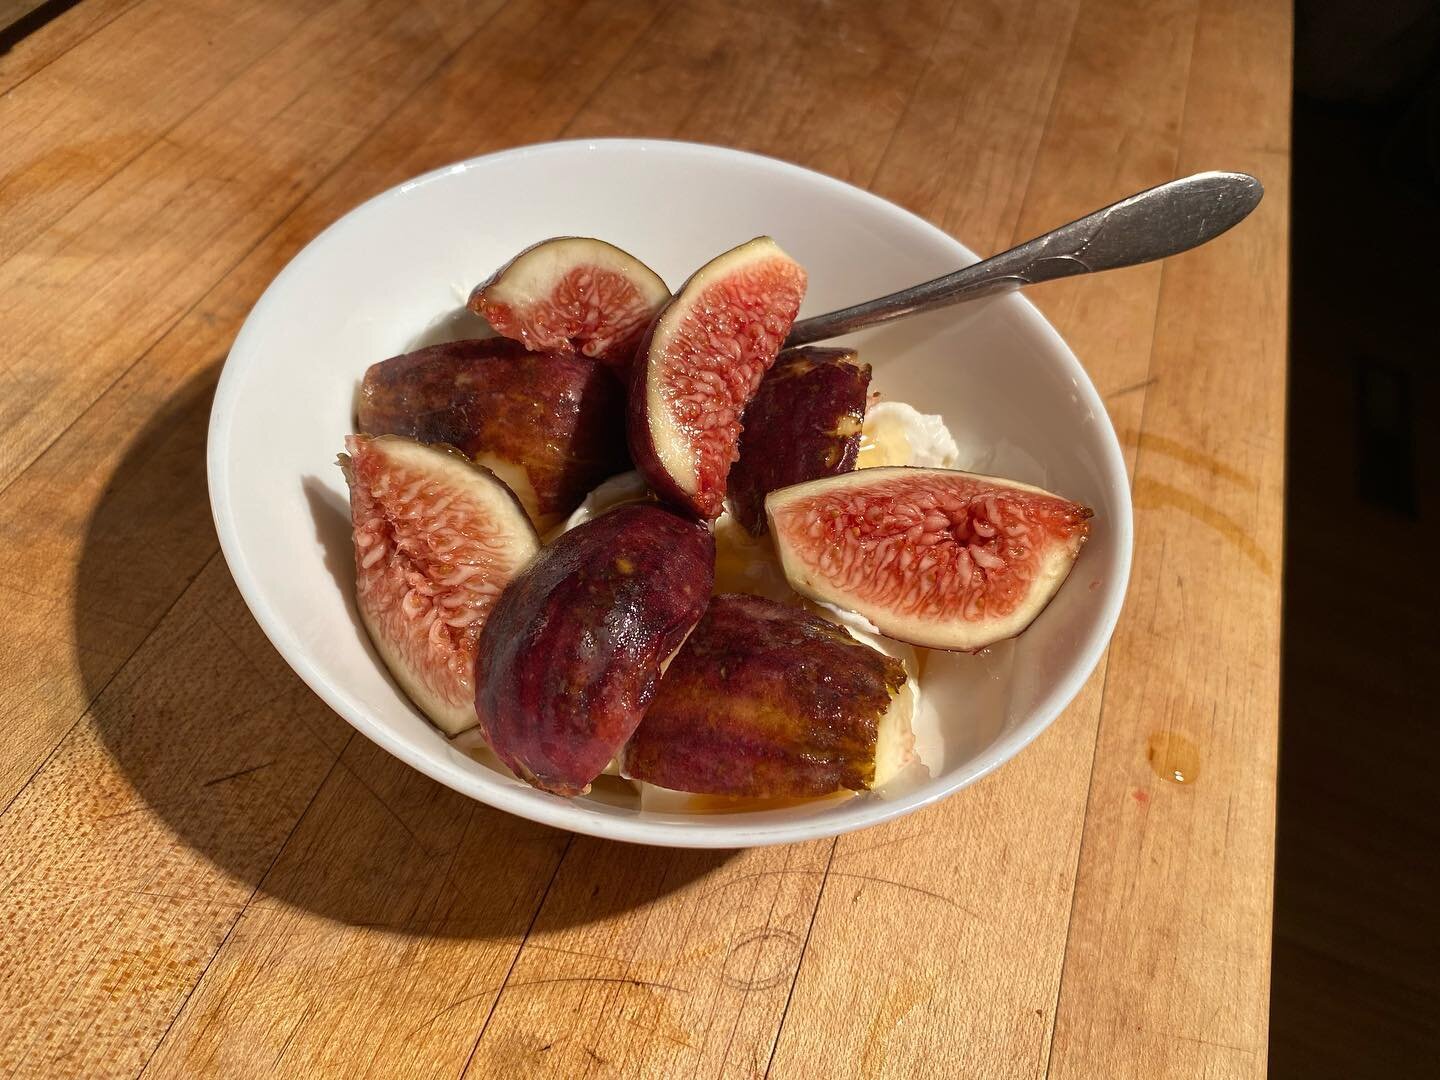 Mama&rsquo;s late night treat. Whole fat Greek yogurt, honey, and fresh figs 🍯
Local friends - Costco has some really nice figs right now.